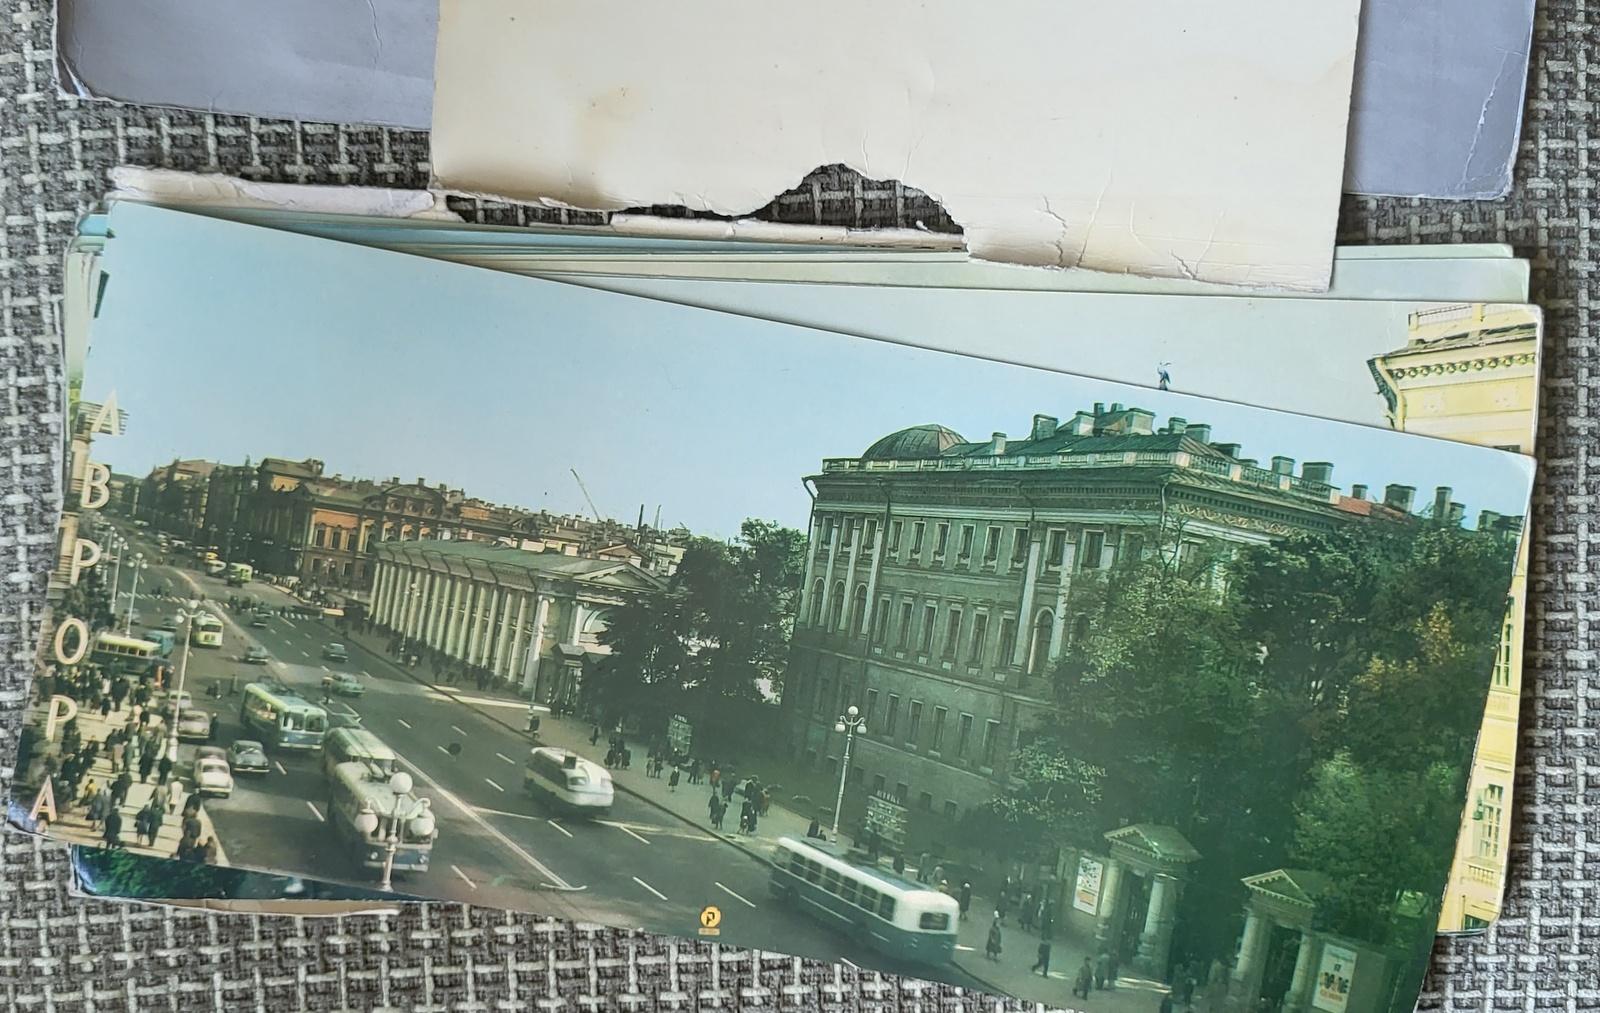 Indulge in the splendor of Leningrad, the cultural gem of the USSR, through this captivating collection of vintage printed photos. Taken by the talented I.B. Holland, these large-format photographs offer a vivid snapshot of the city's iconic